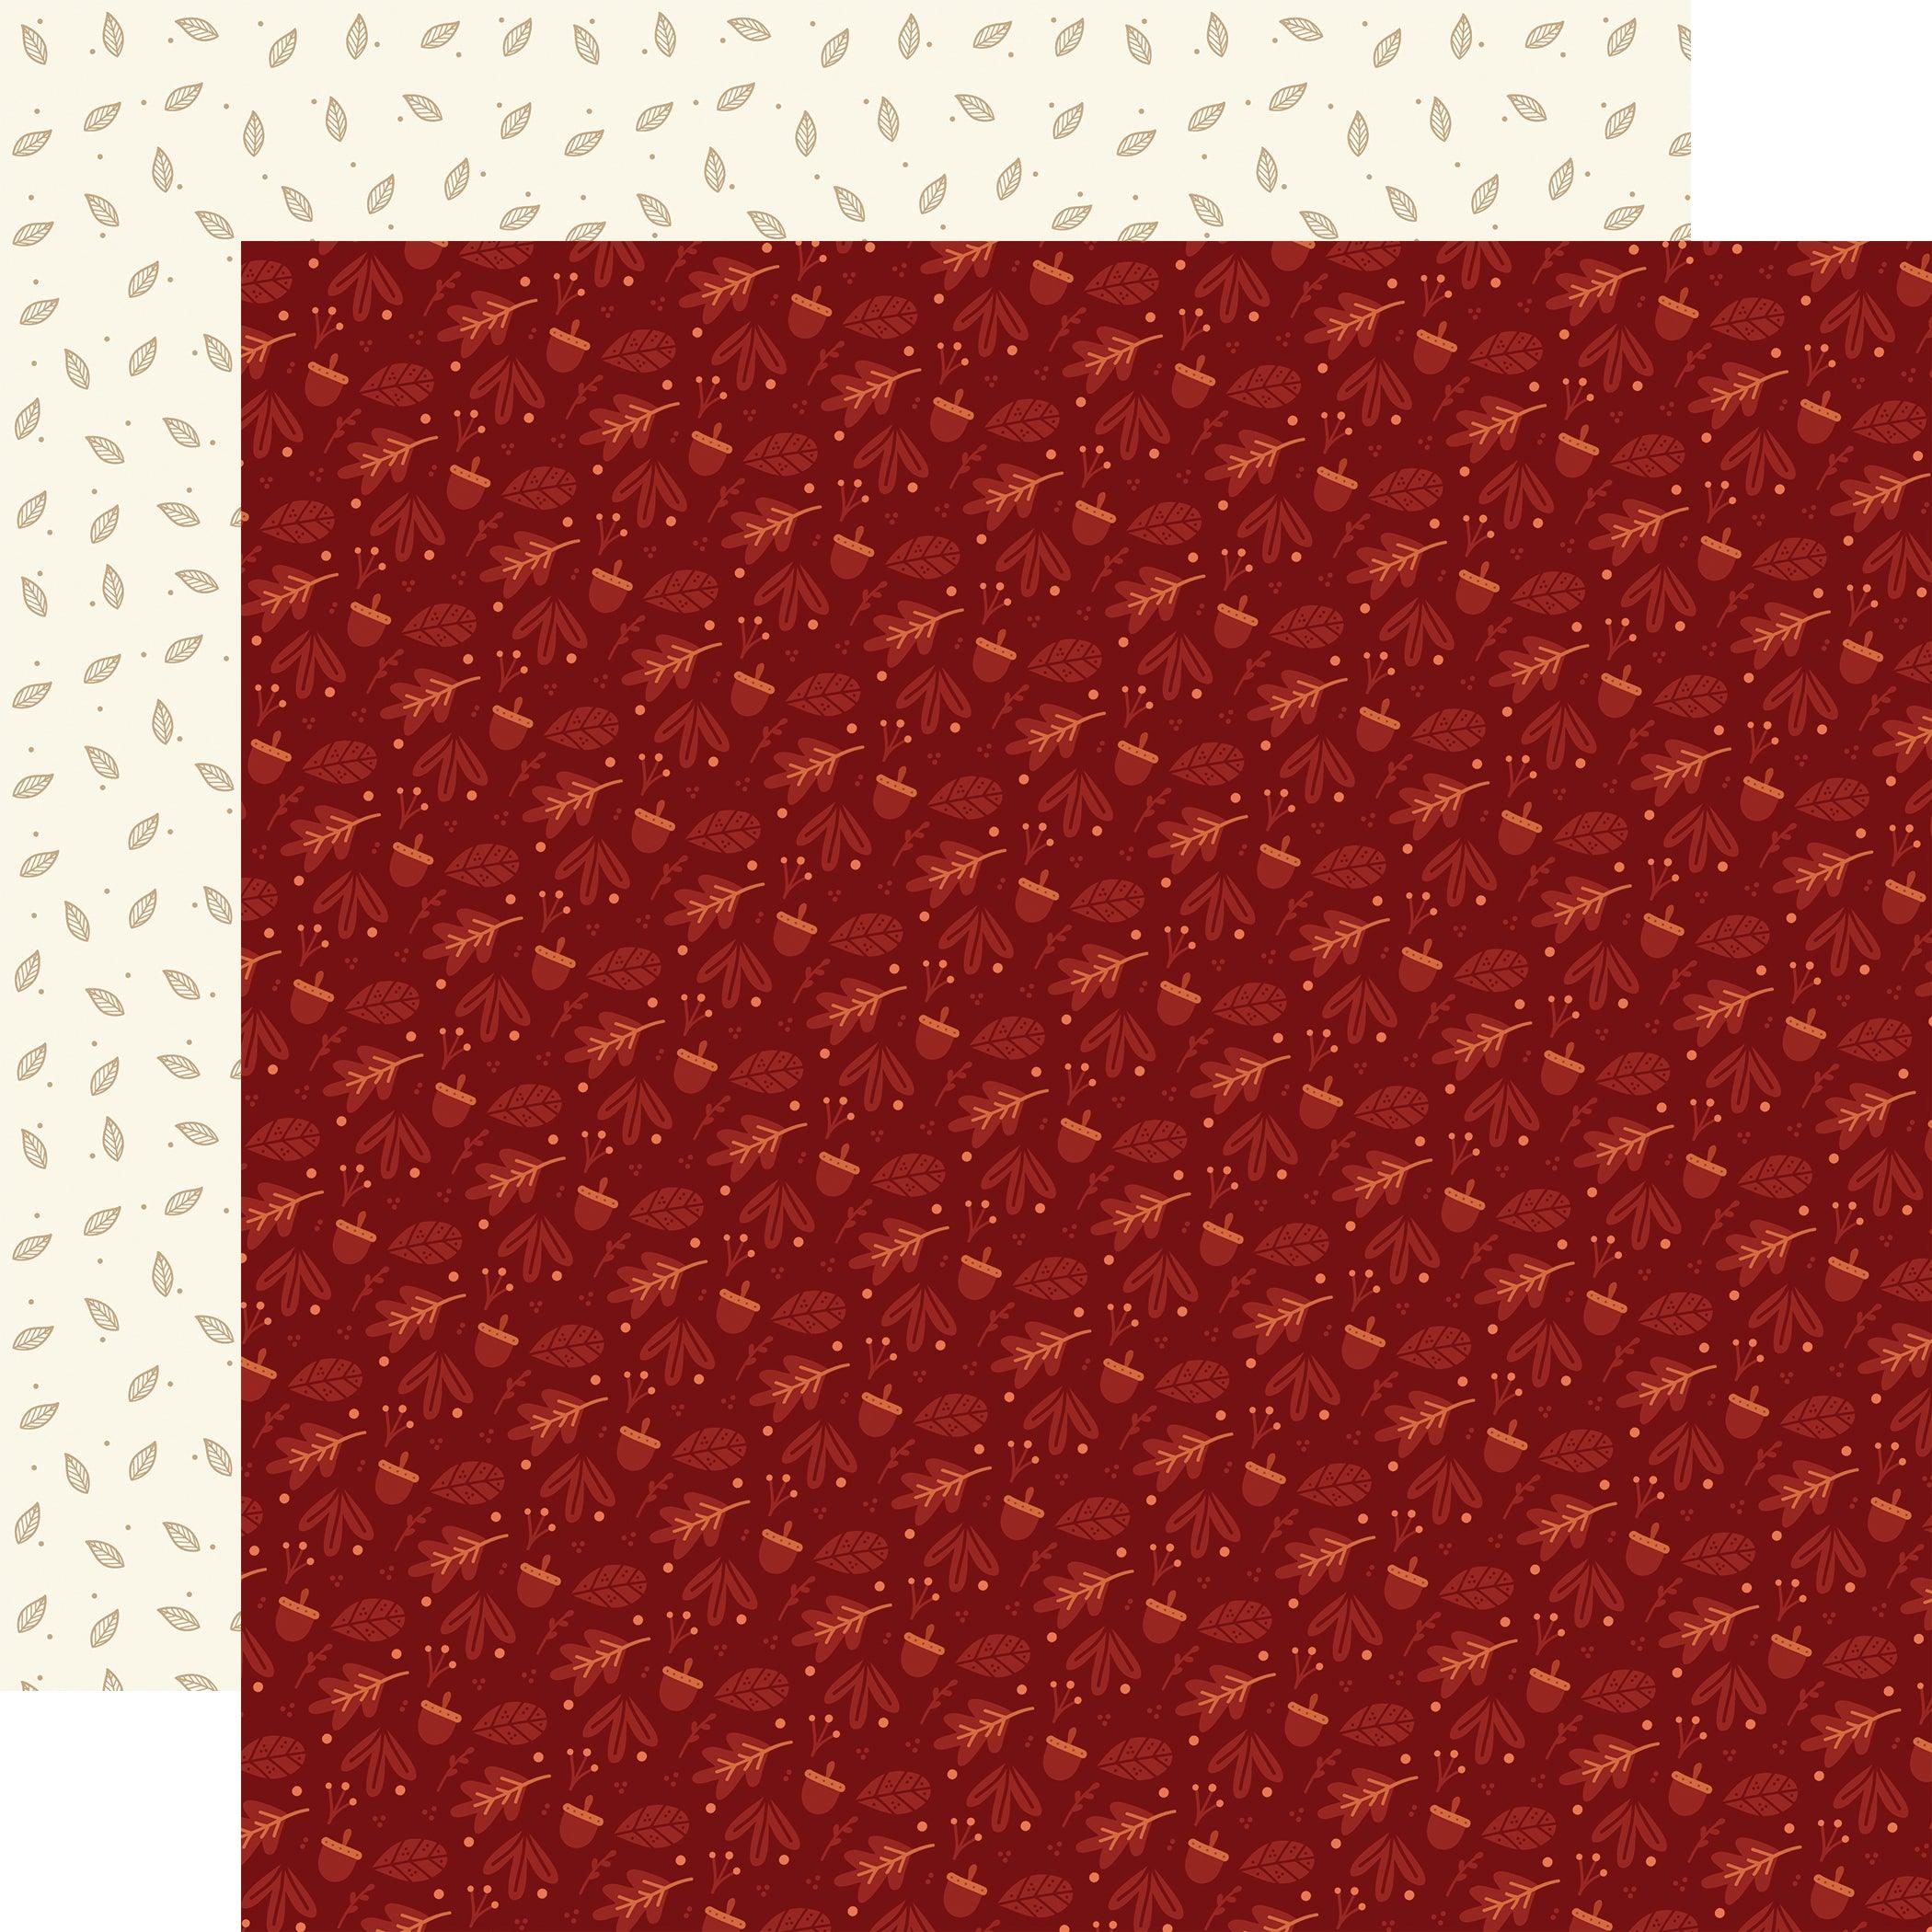 I Love Fall Collection Crisp Fall Air 12 x 12 Double-Sided Scrapbook Paper by Echo Park Paper - Scrapbook Supply Companies